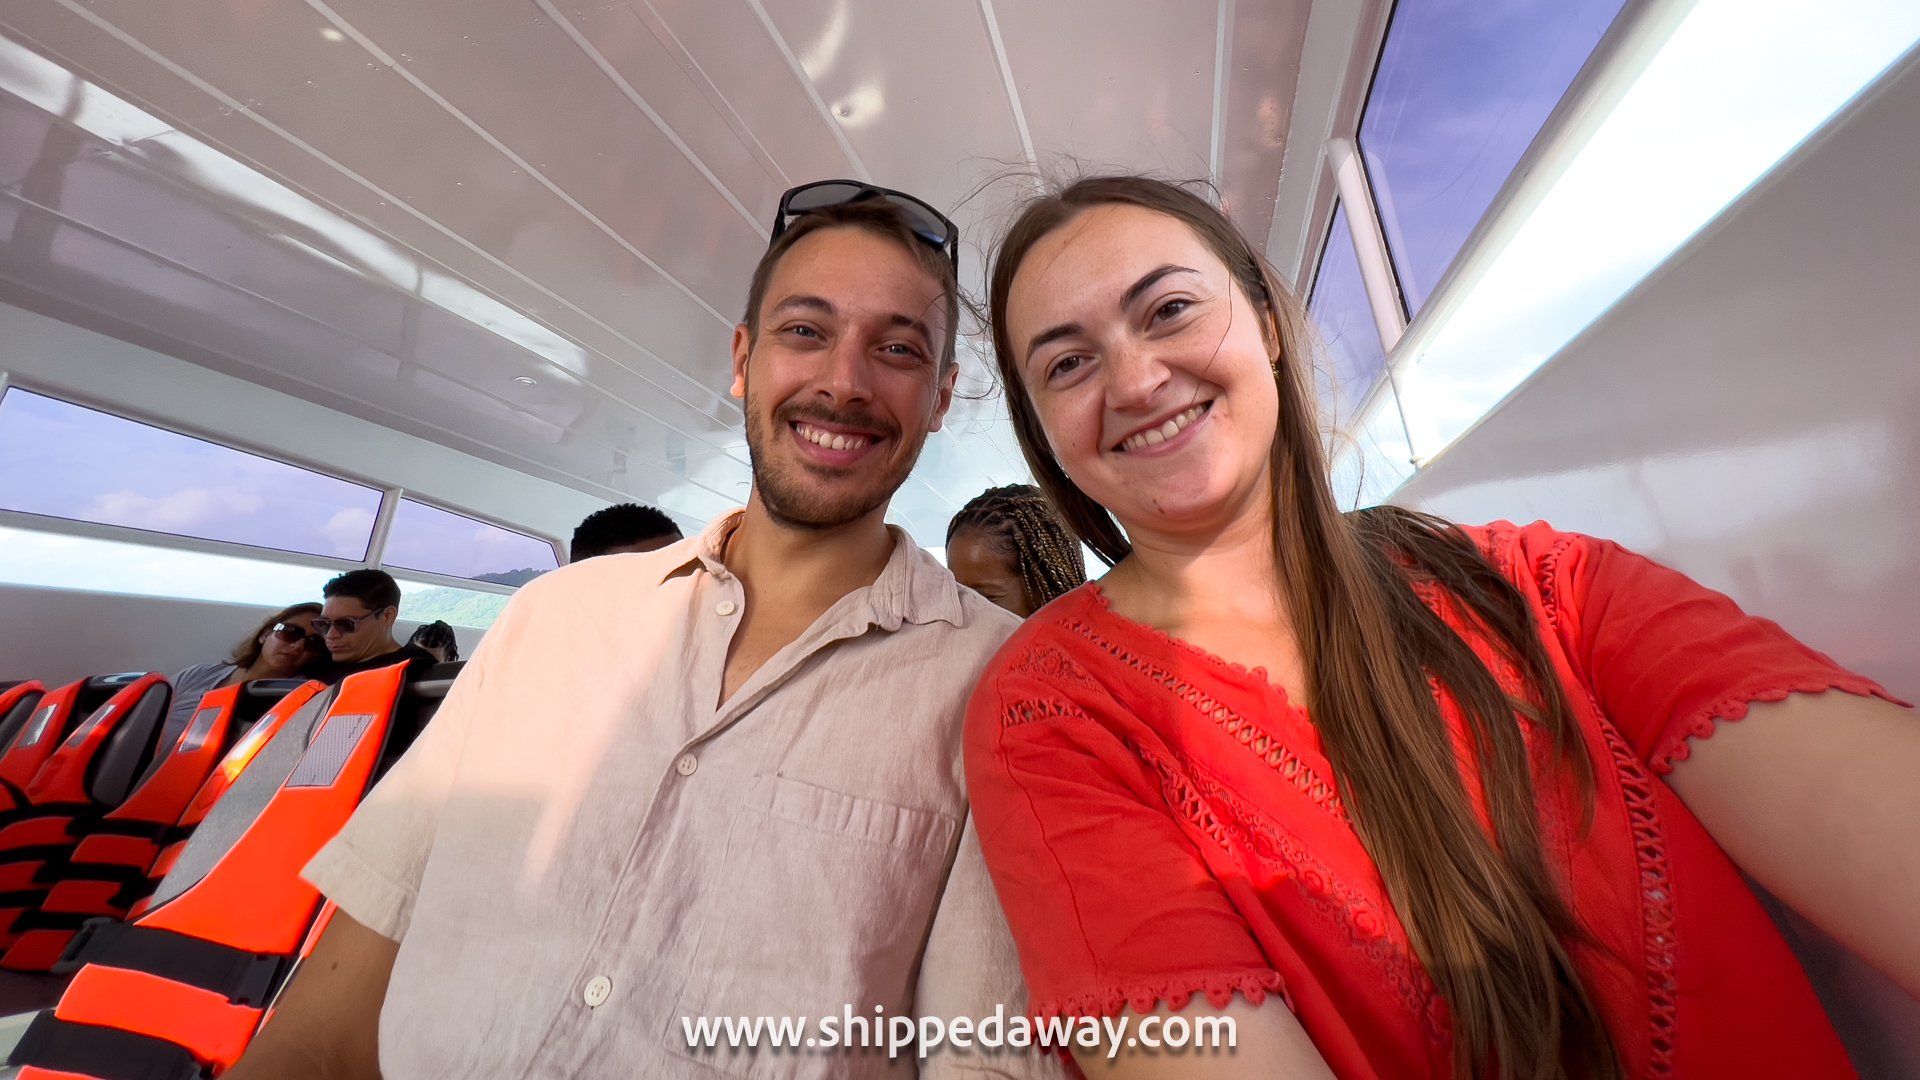 Arijana Tkalce and Matej Span in a speedboat on the way to Phi Phi Islands